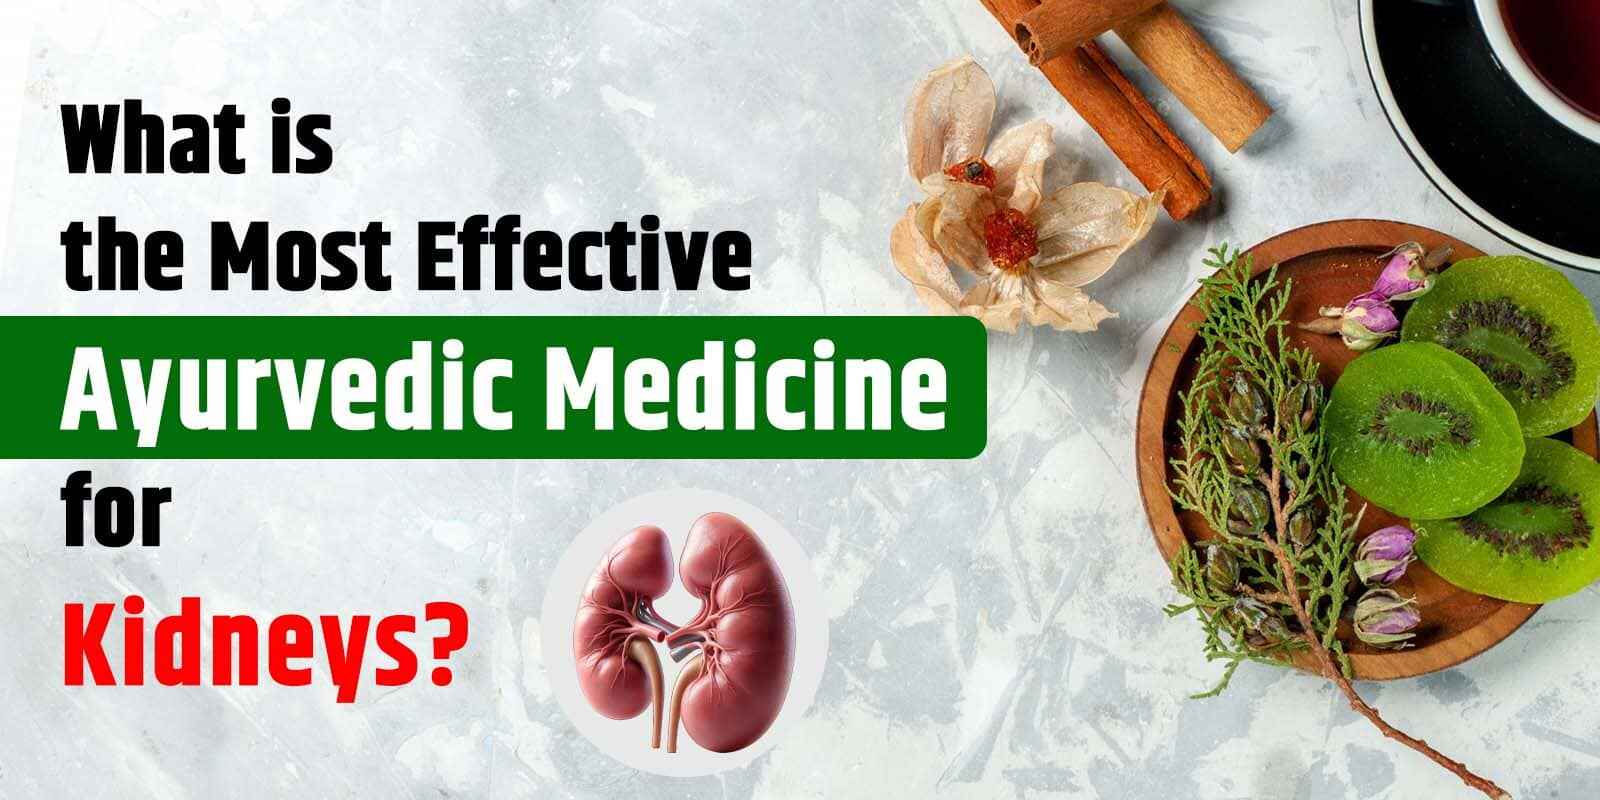 What is the Most Effective Ayurvedic Medicine for Kidneys?